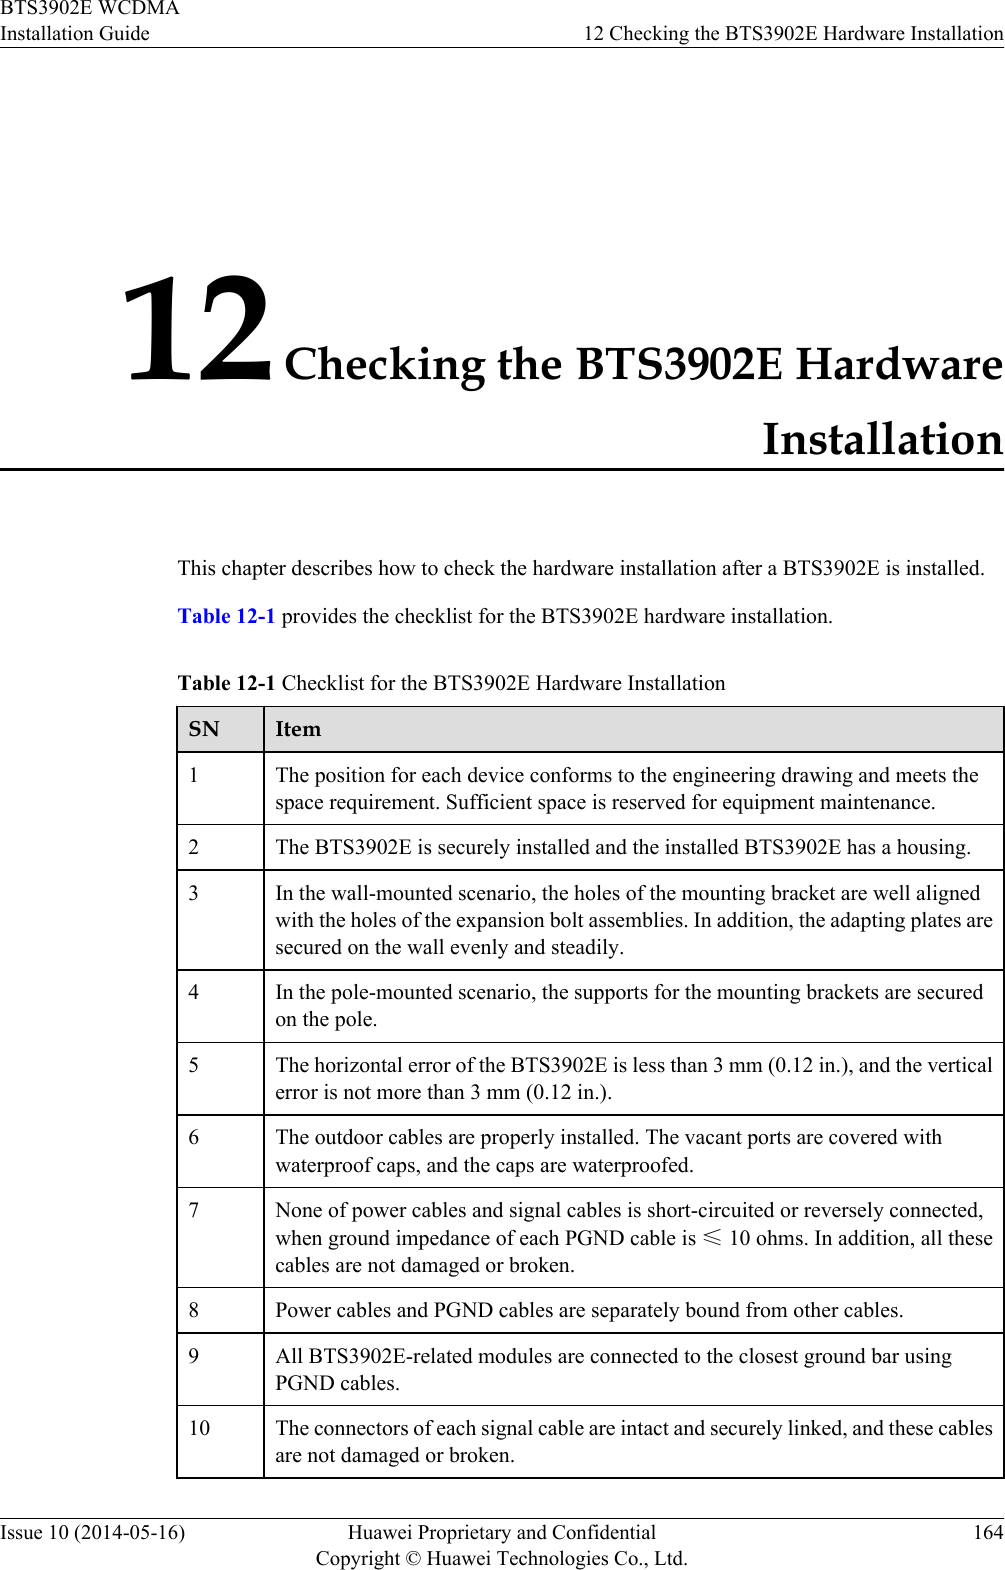 12 Checking the BTS3902E HardwareInstallationThis chapter describes how to check the hardware installation after a BTS3902E is installed.Table 12-1 provides the checklist for the BTS3902E hardware installation.Table 12-1 Checklist for the BTS3902E Hardware InstallationSN Item1The position for each device conforms to the engineering drawing and meets thespace requirement. Sufficient space is reserved for equipment maintenance.2 The BTS3902E is securely installed and the installed BTS3902E has a housing.3 In the wall-mounted scenario, the holes of the mounting bracket are well alignedwith the holes of the expansion bolt assemblies. In addition, the adapting plates aresecured on the wall evenly and steadily.4 In the pole-mounted scenario, the supports for the mounting brackets are securedon the pole.5 The horizontal error of the BTS3902E is less than 3 mm (0.12 in.), and the verticalerror is not more than 3 mm (0.12 in.).6 The outdoor cables are properly installed. The vacant ports are covered withwaterproof caps, and the caps are waterproofed.7 None of power cables and signal cables is short-circuited or reversely connected,when ground impedance of each PGND cable is ≤ 10 ohms. In addition, all thesecables are not damaged or broken.8 Power cables and PGND cables are separately bound from other cables.9 All BTS3902E-related modules are connected to the closest ground bar usingPGND cables.10 The connectors of each signal cable are intact and securely linked, and these cablesare not damaged or broken.BTS3902E WCDMAInstallation Guide 12 Checking the BTS3902E Hardware InstallationIssue 10 (2014-05-16) Huawei Proprietary and ConfidentialCopyright © Huawei Technologies Co., Ltd.164